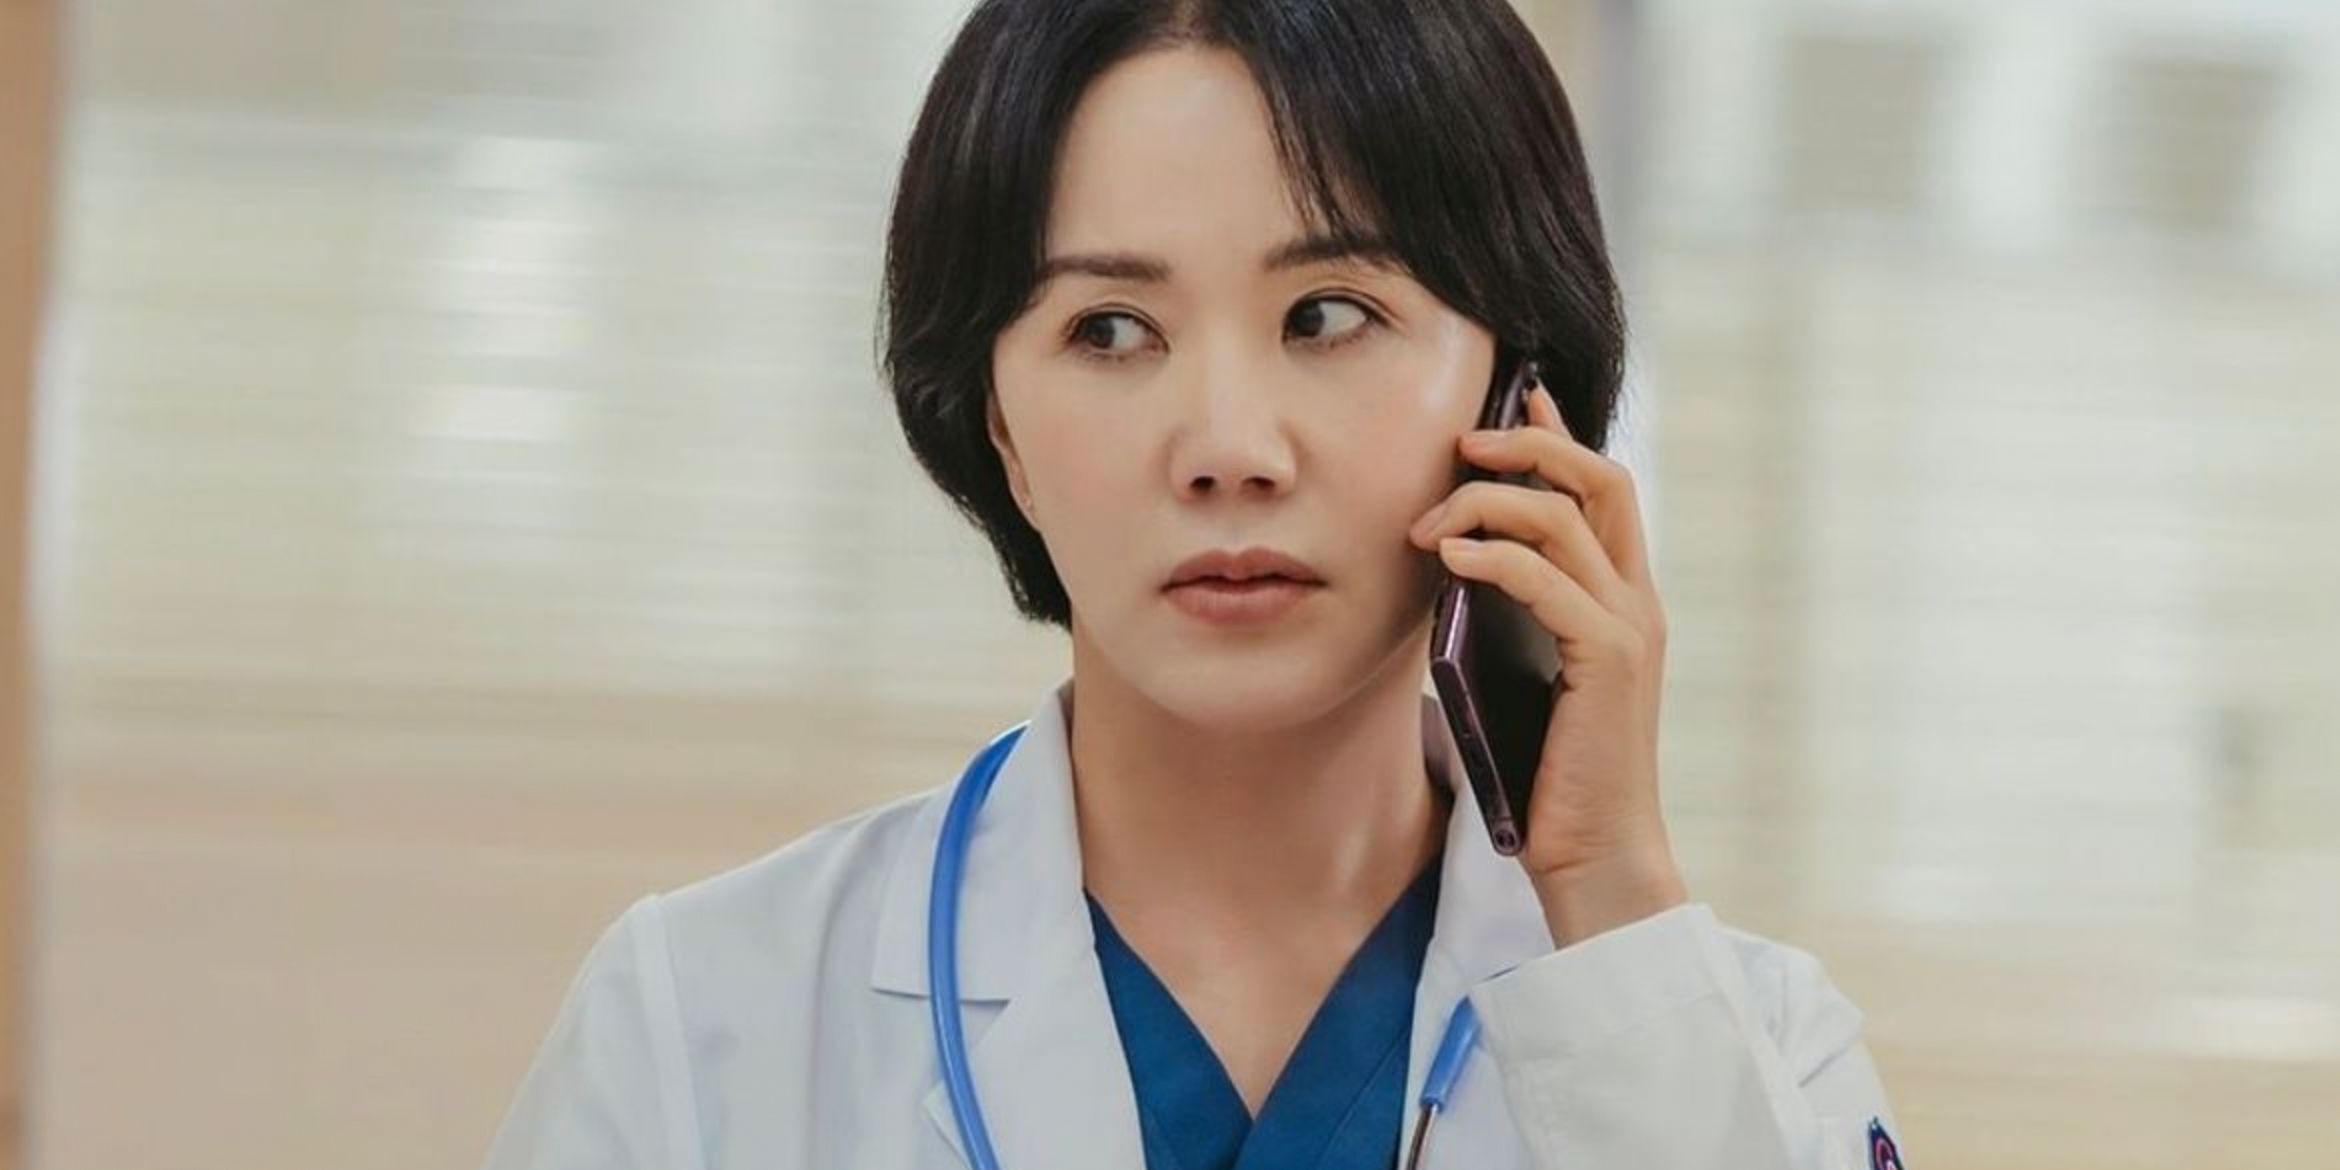 Doctor Cha on her cell phone in the Medical Korean drama named for her